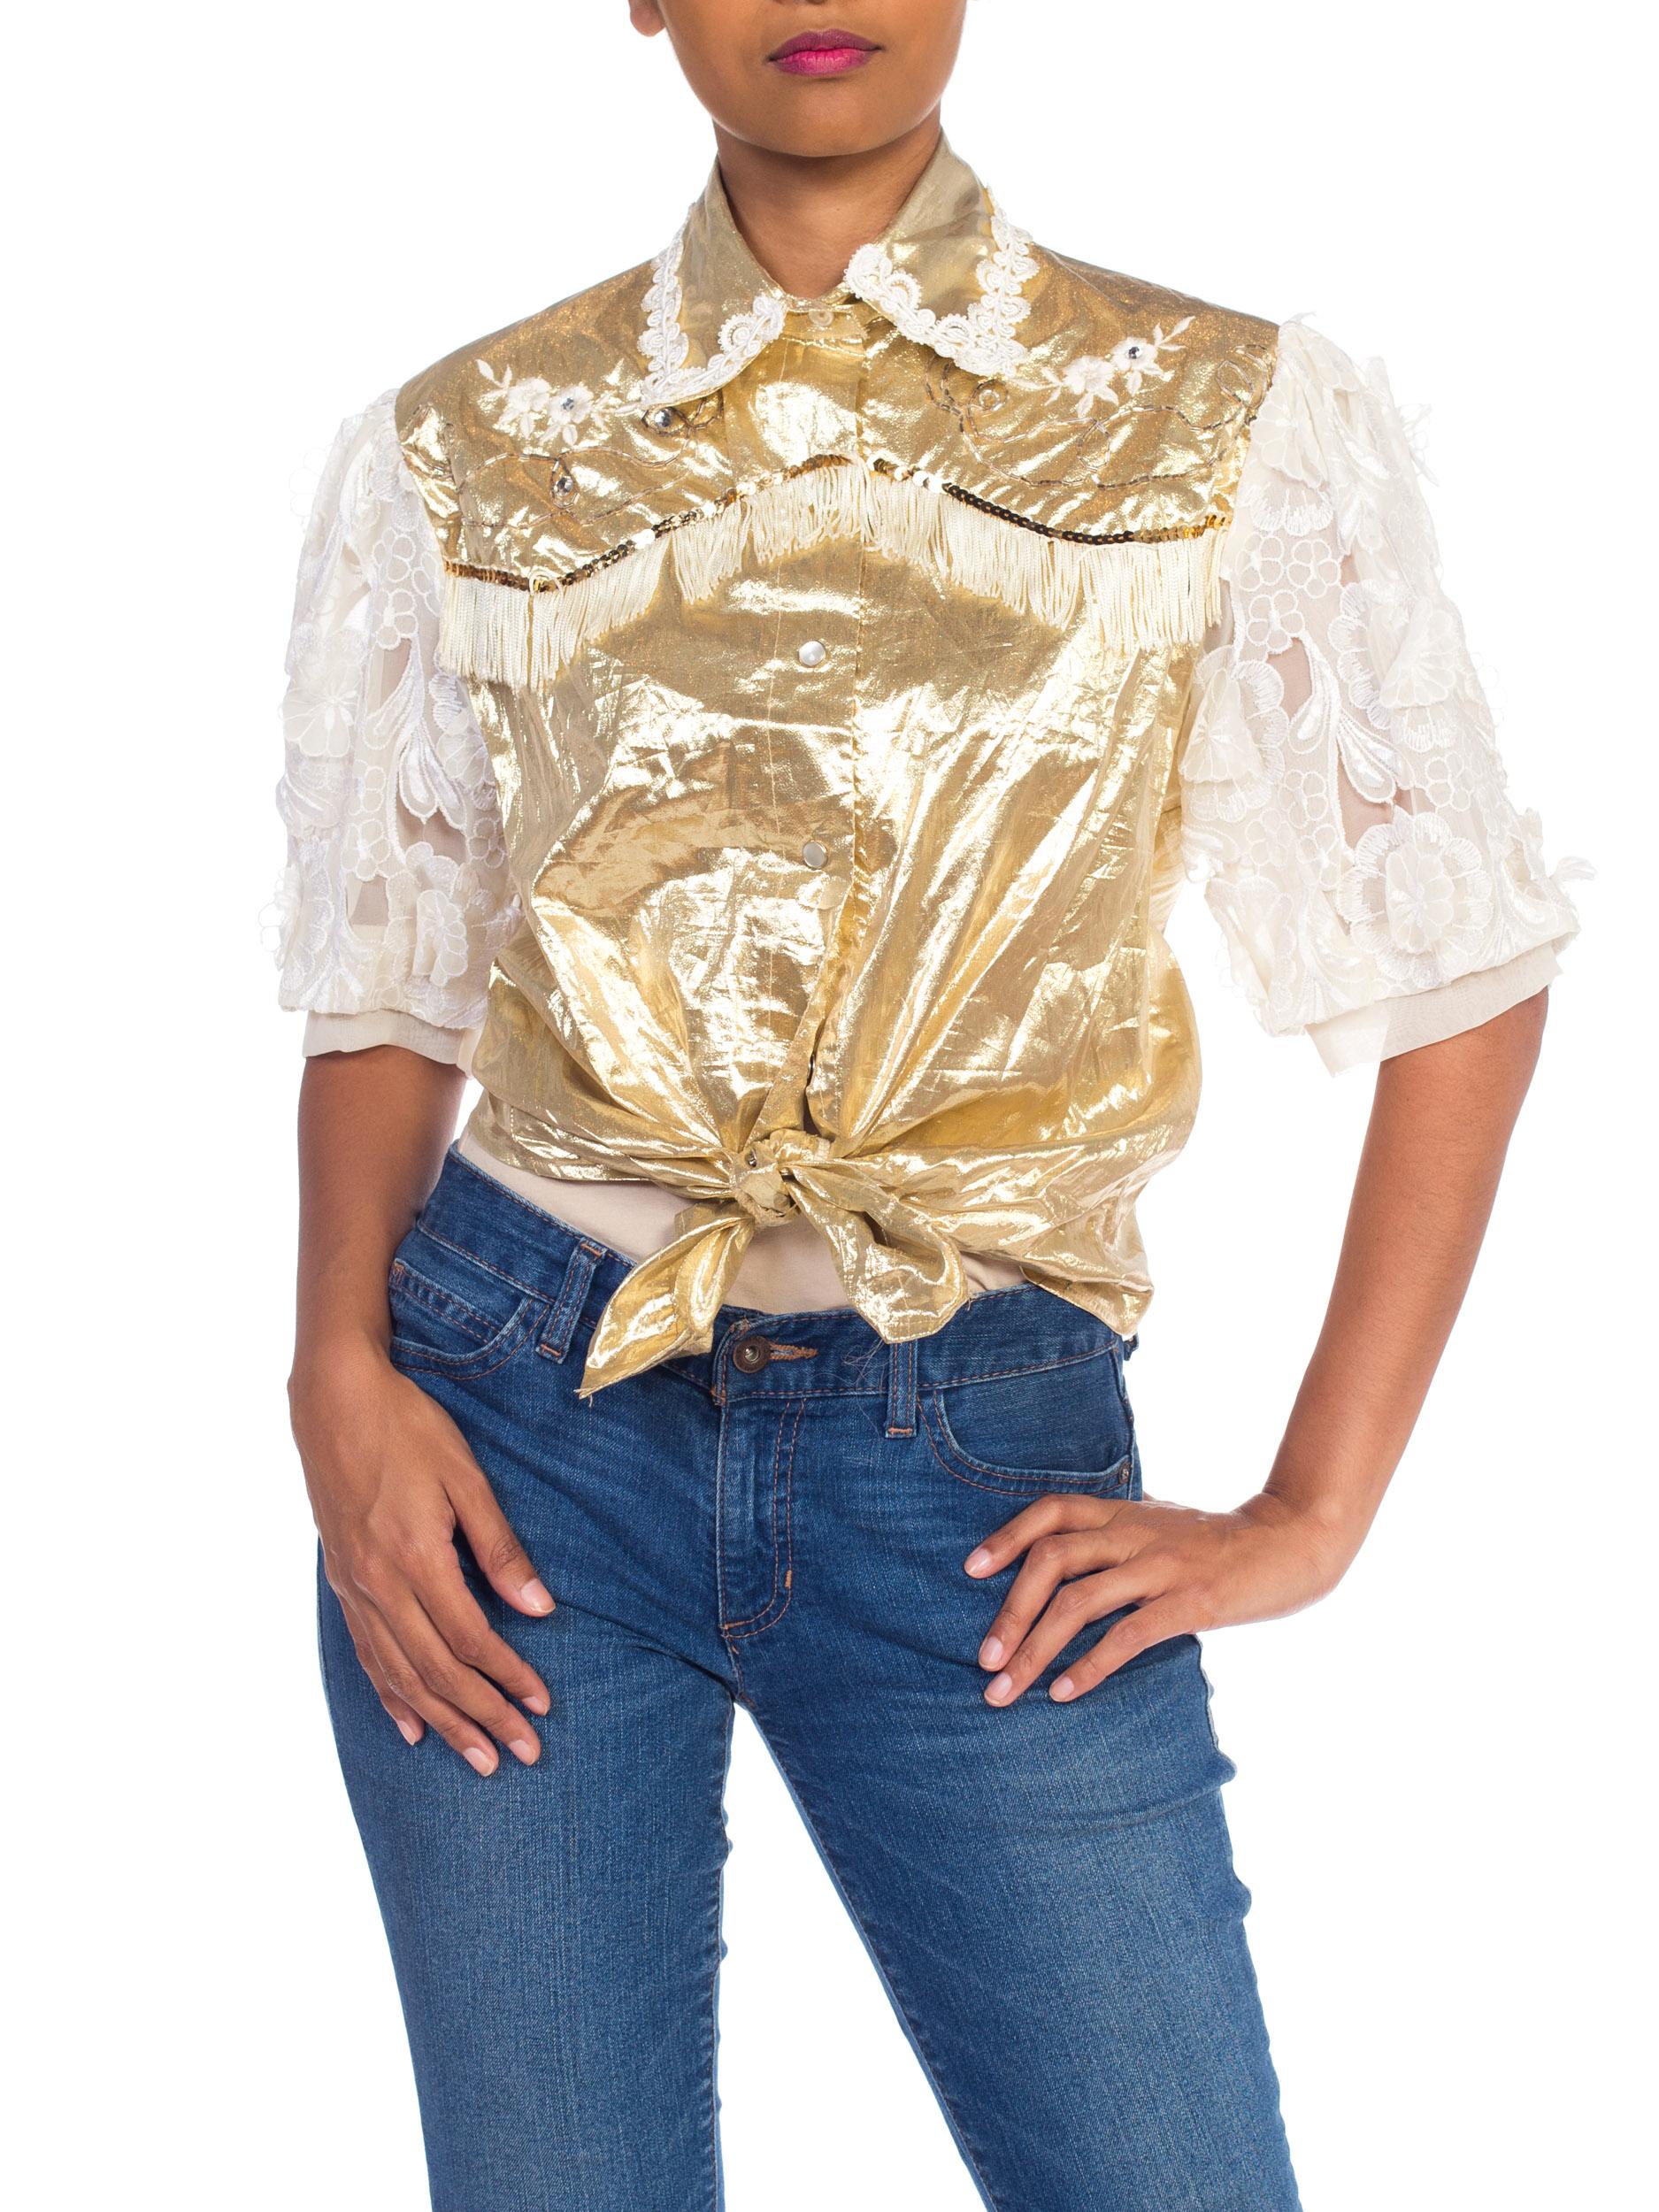 Gold Lamé & Lace Western Top with Fringe 8